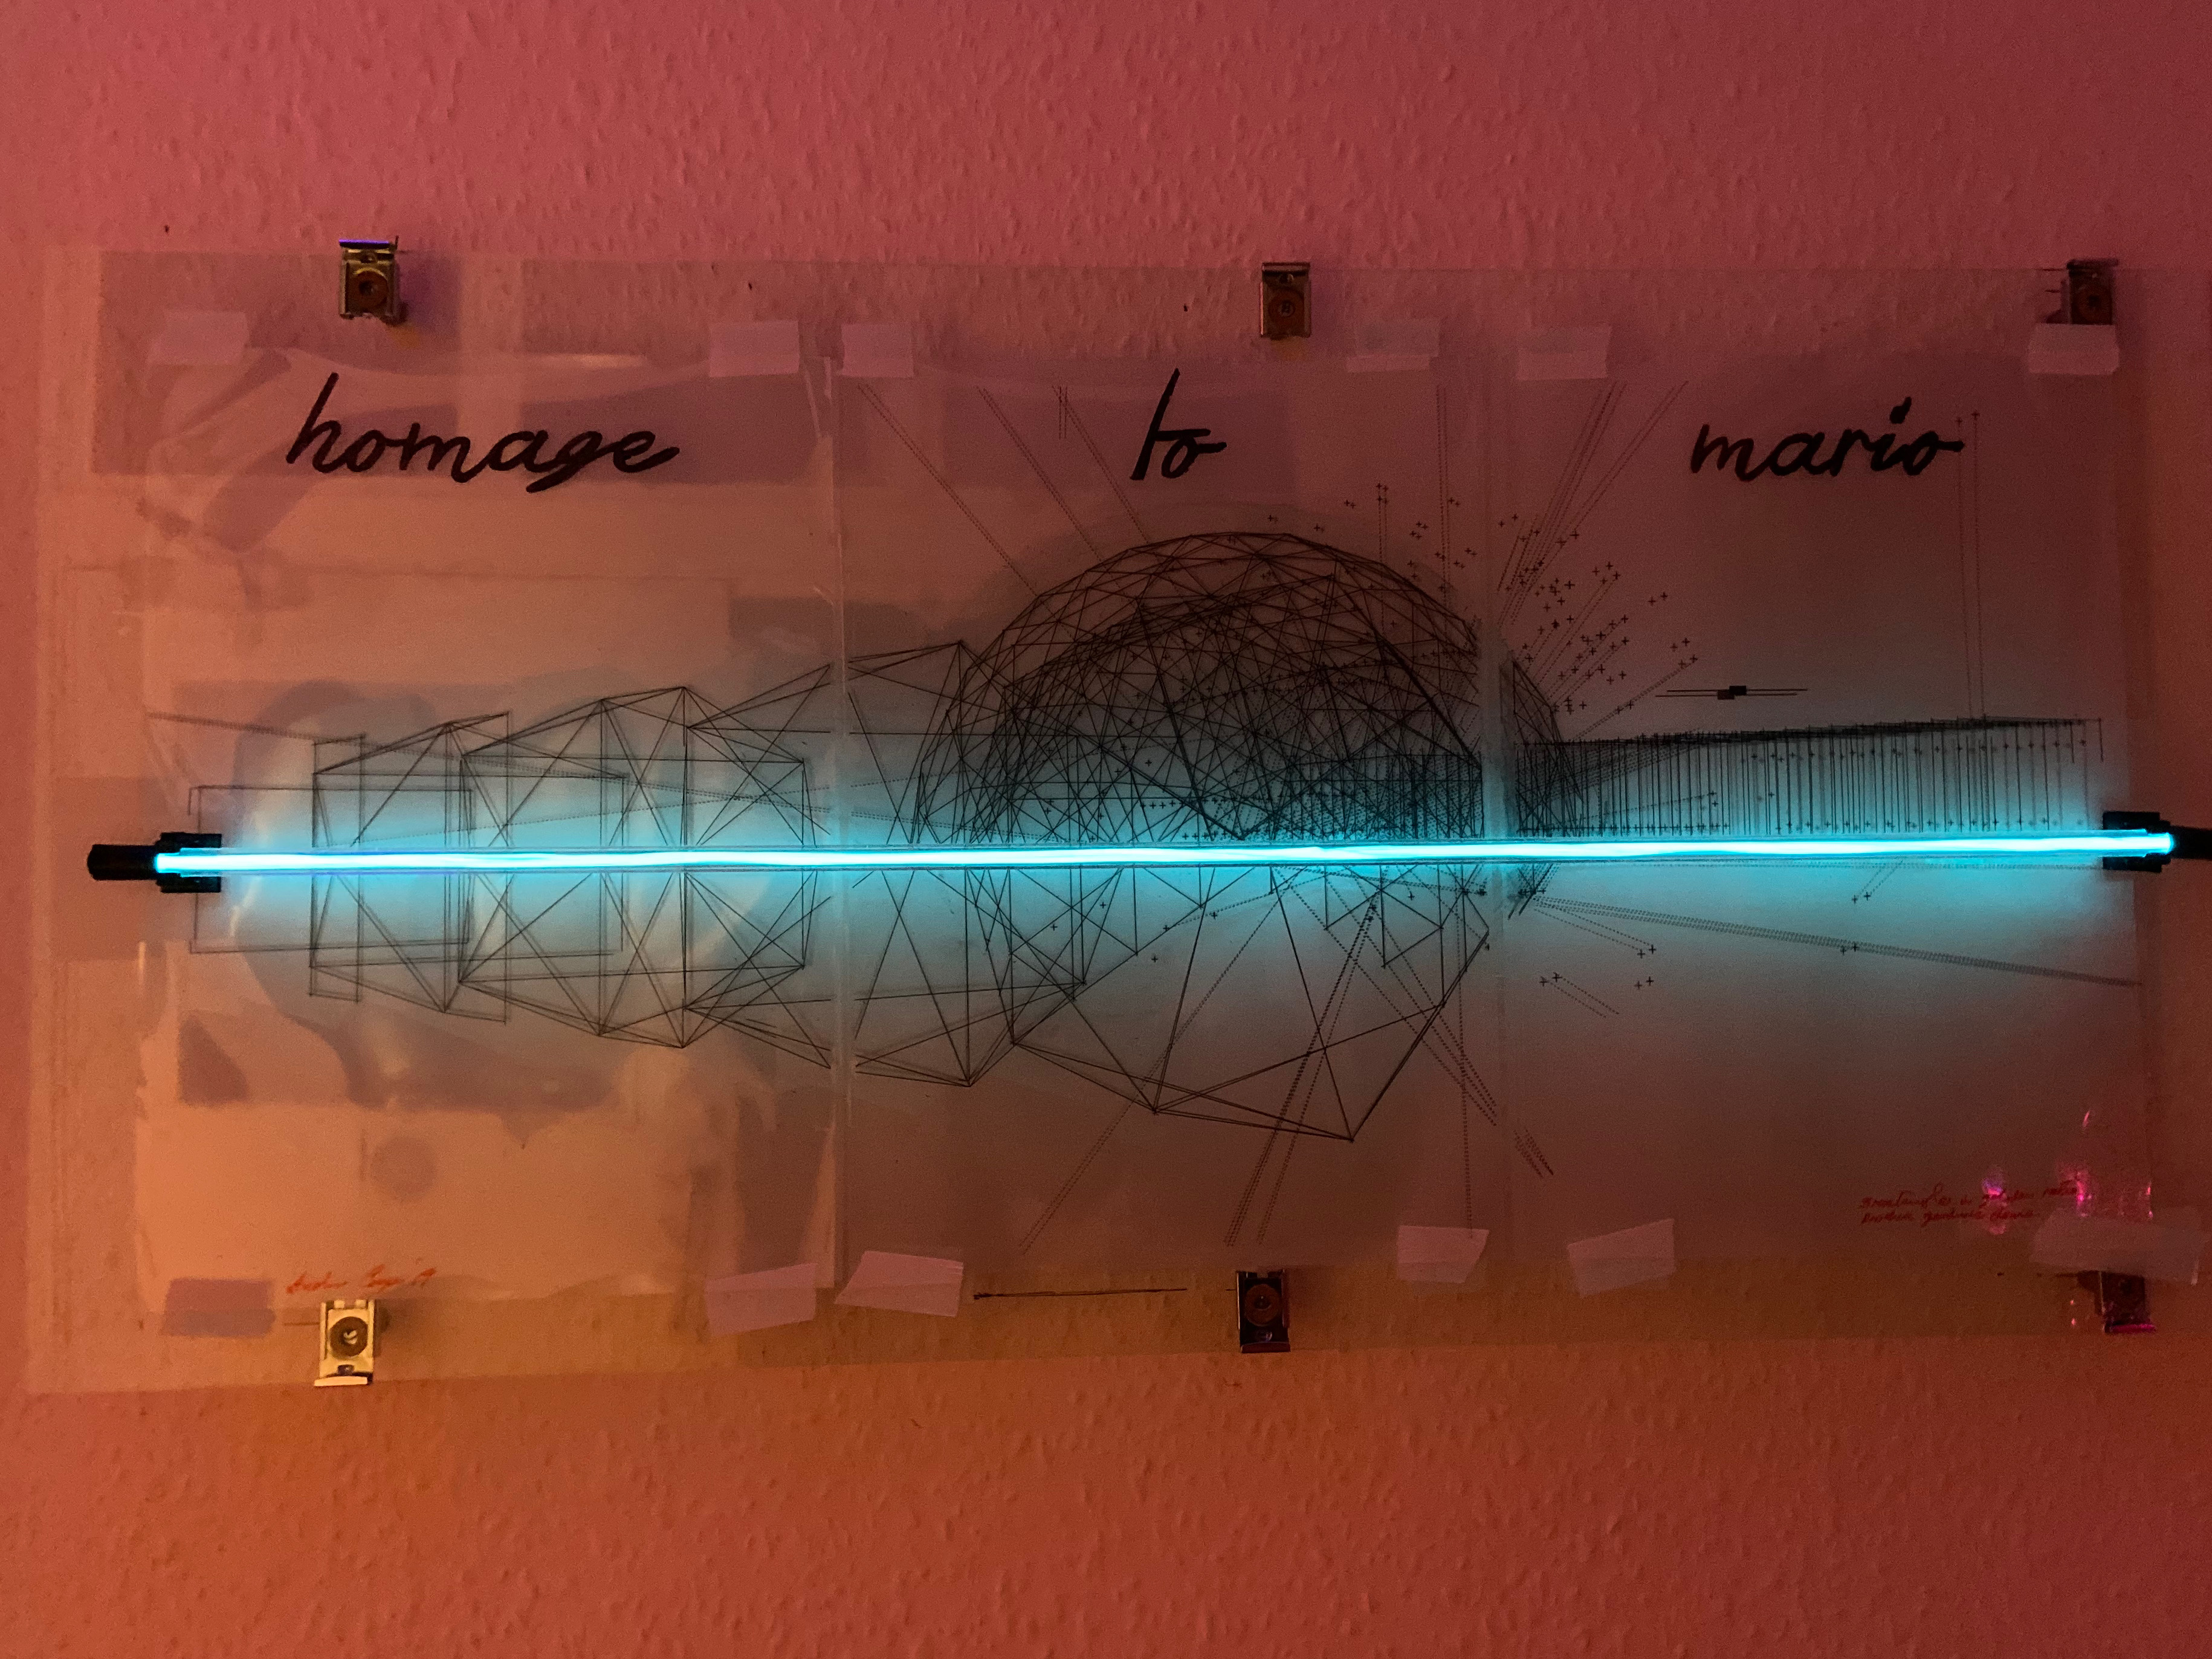 A neon blue line strikes through geometric line drawings of shapes, with the caption "homage to Mario" above